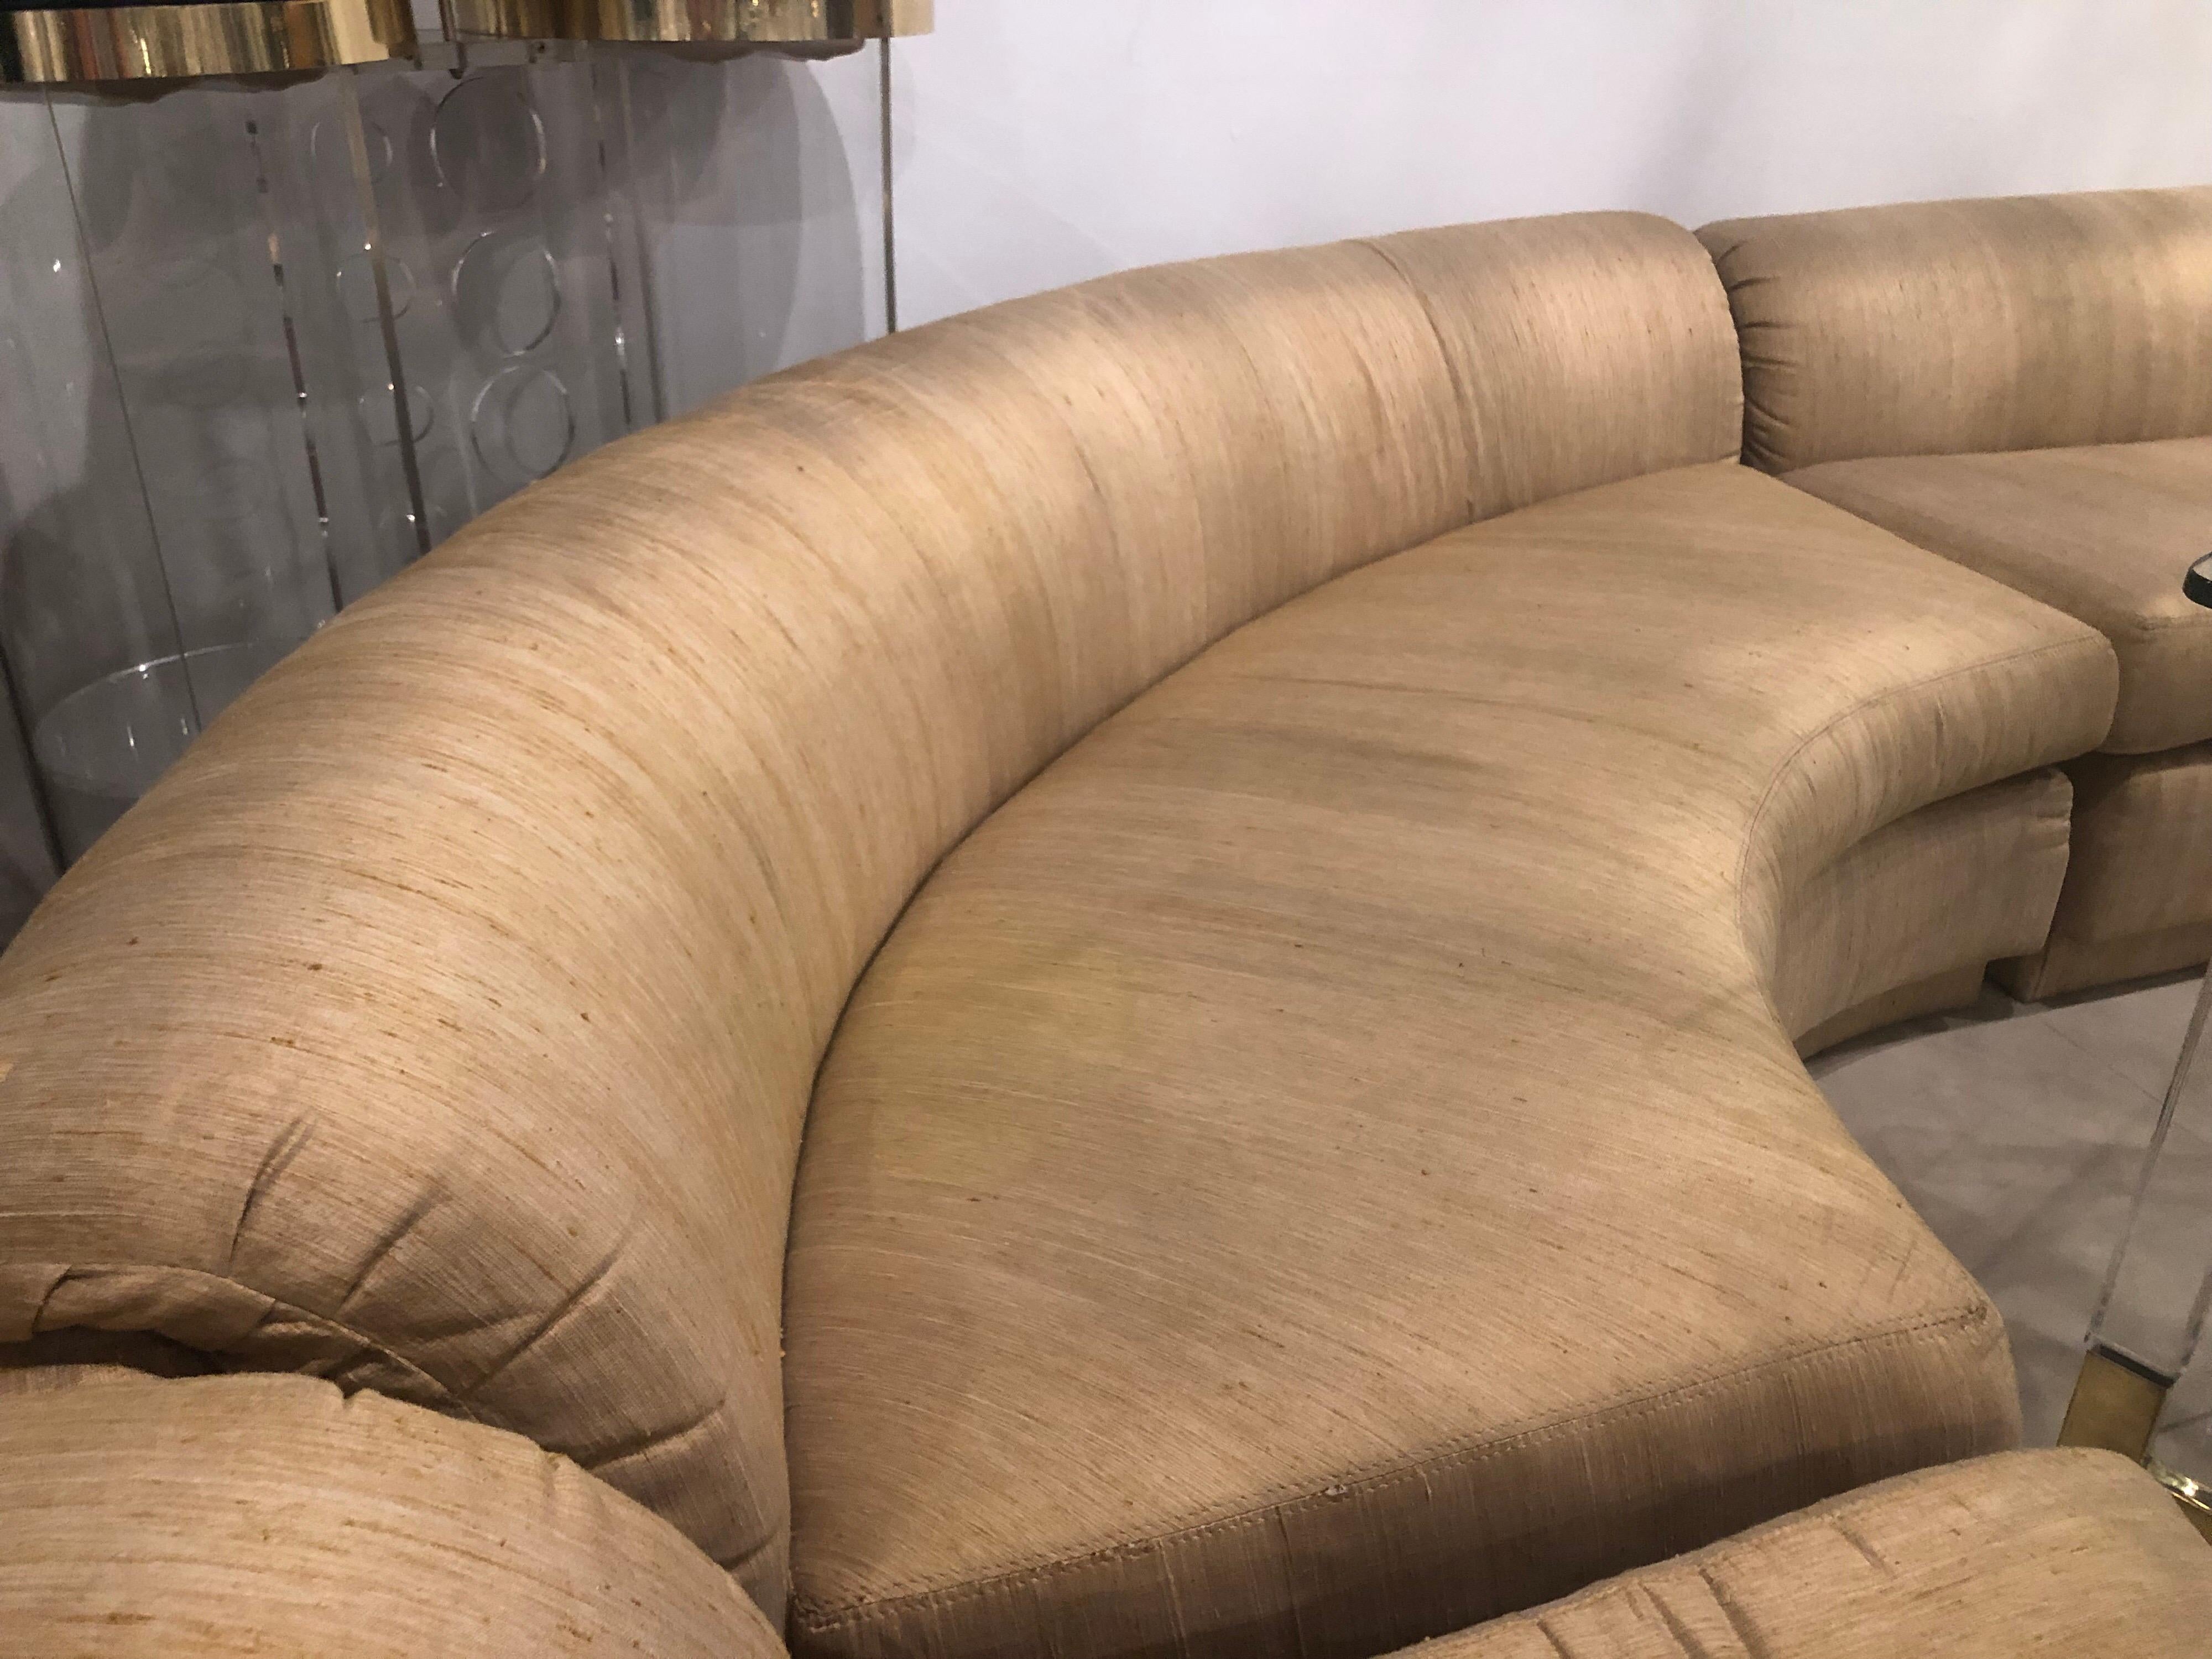 American Vintage Mid Century Modern Curved 5 Piece Circular Serpentine Sectional Sofa